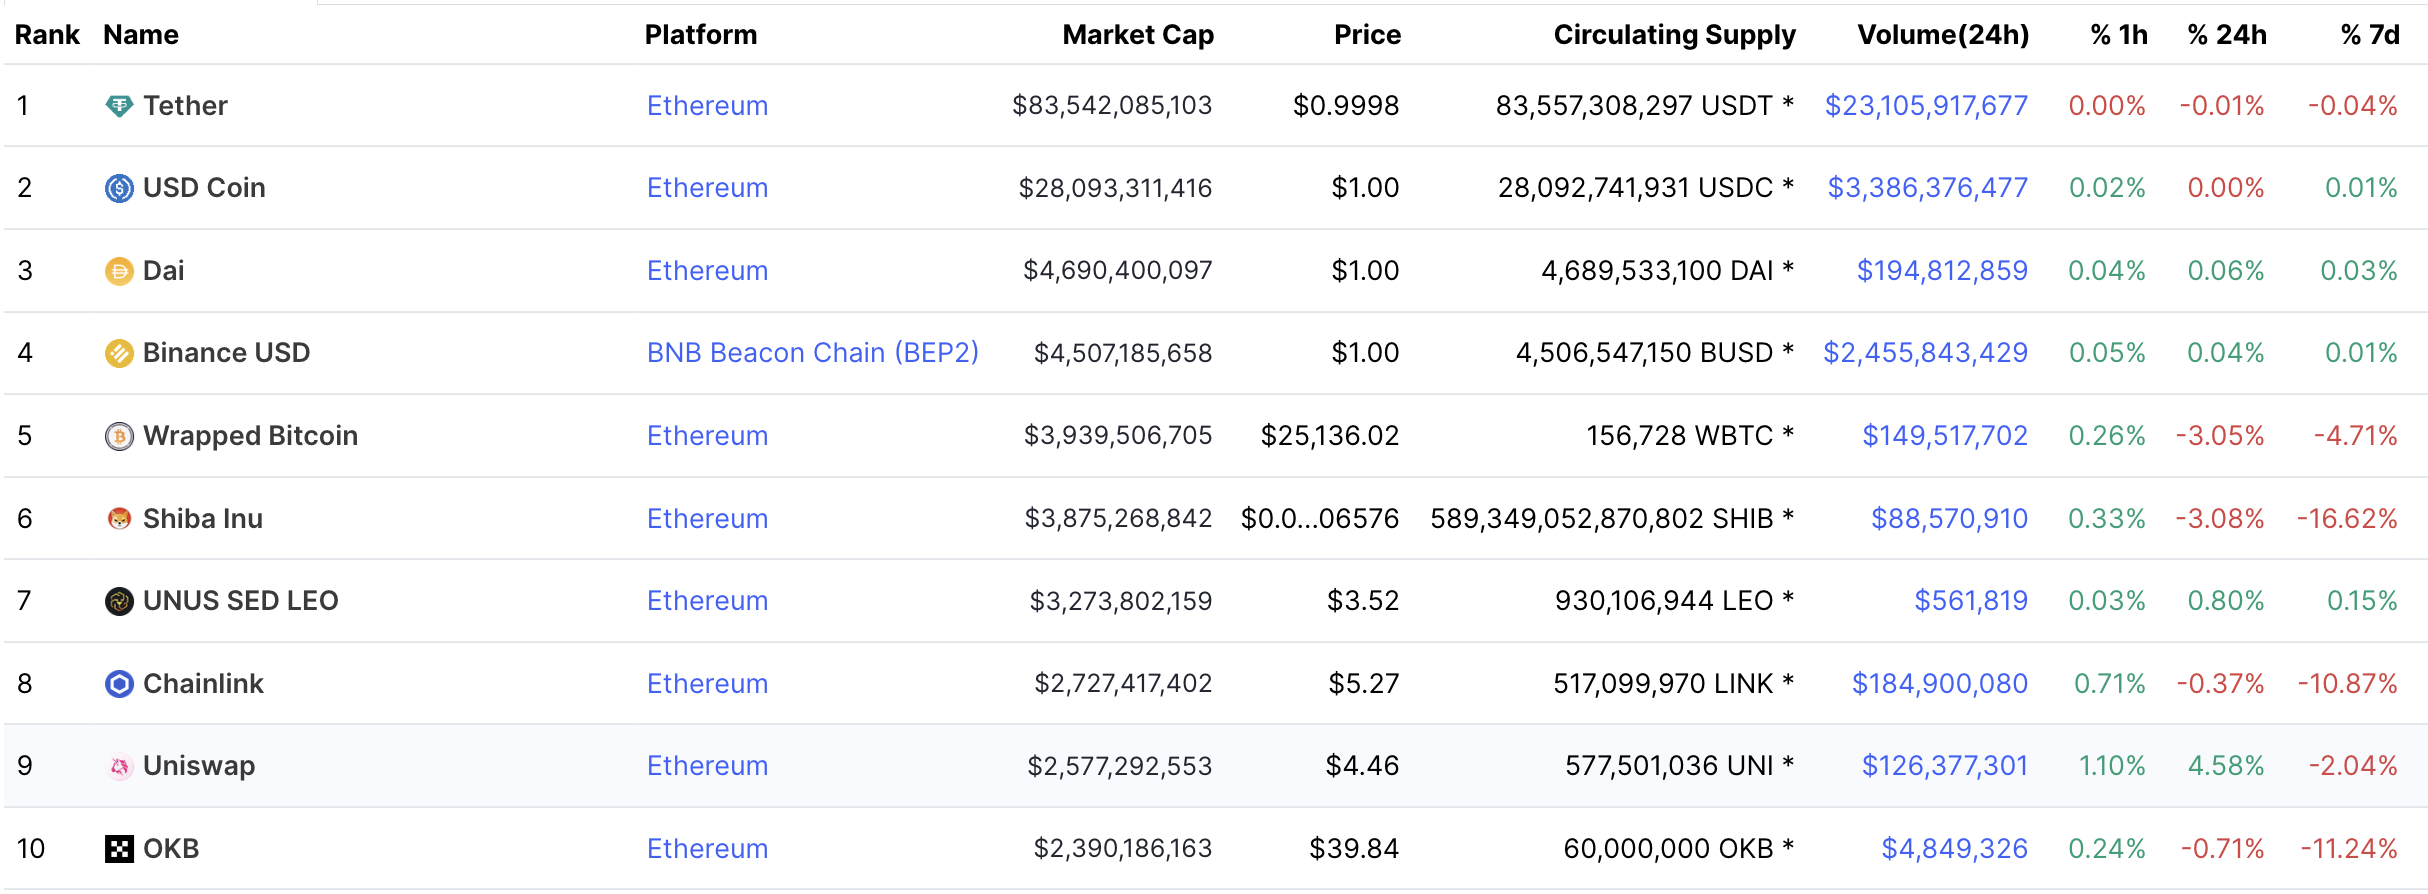 Top Ethereum ERC CryptoCurrency Tokens by Market Cap | CoinCodex